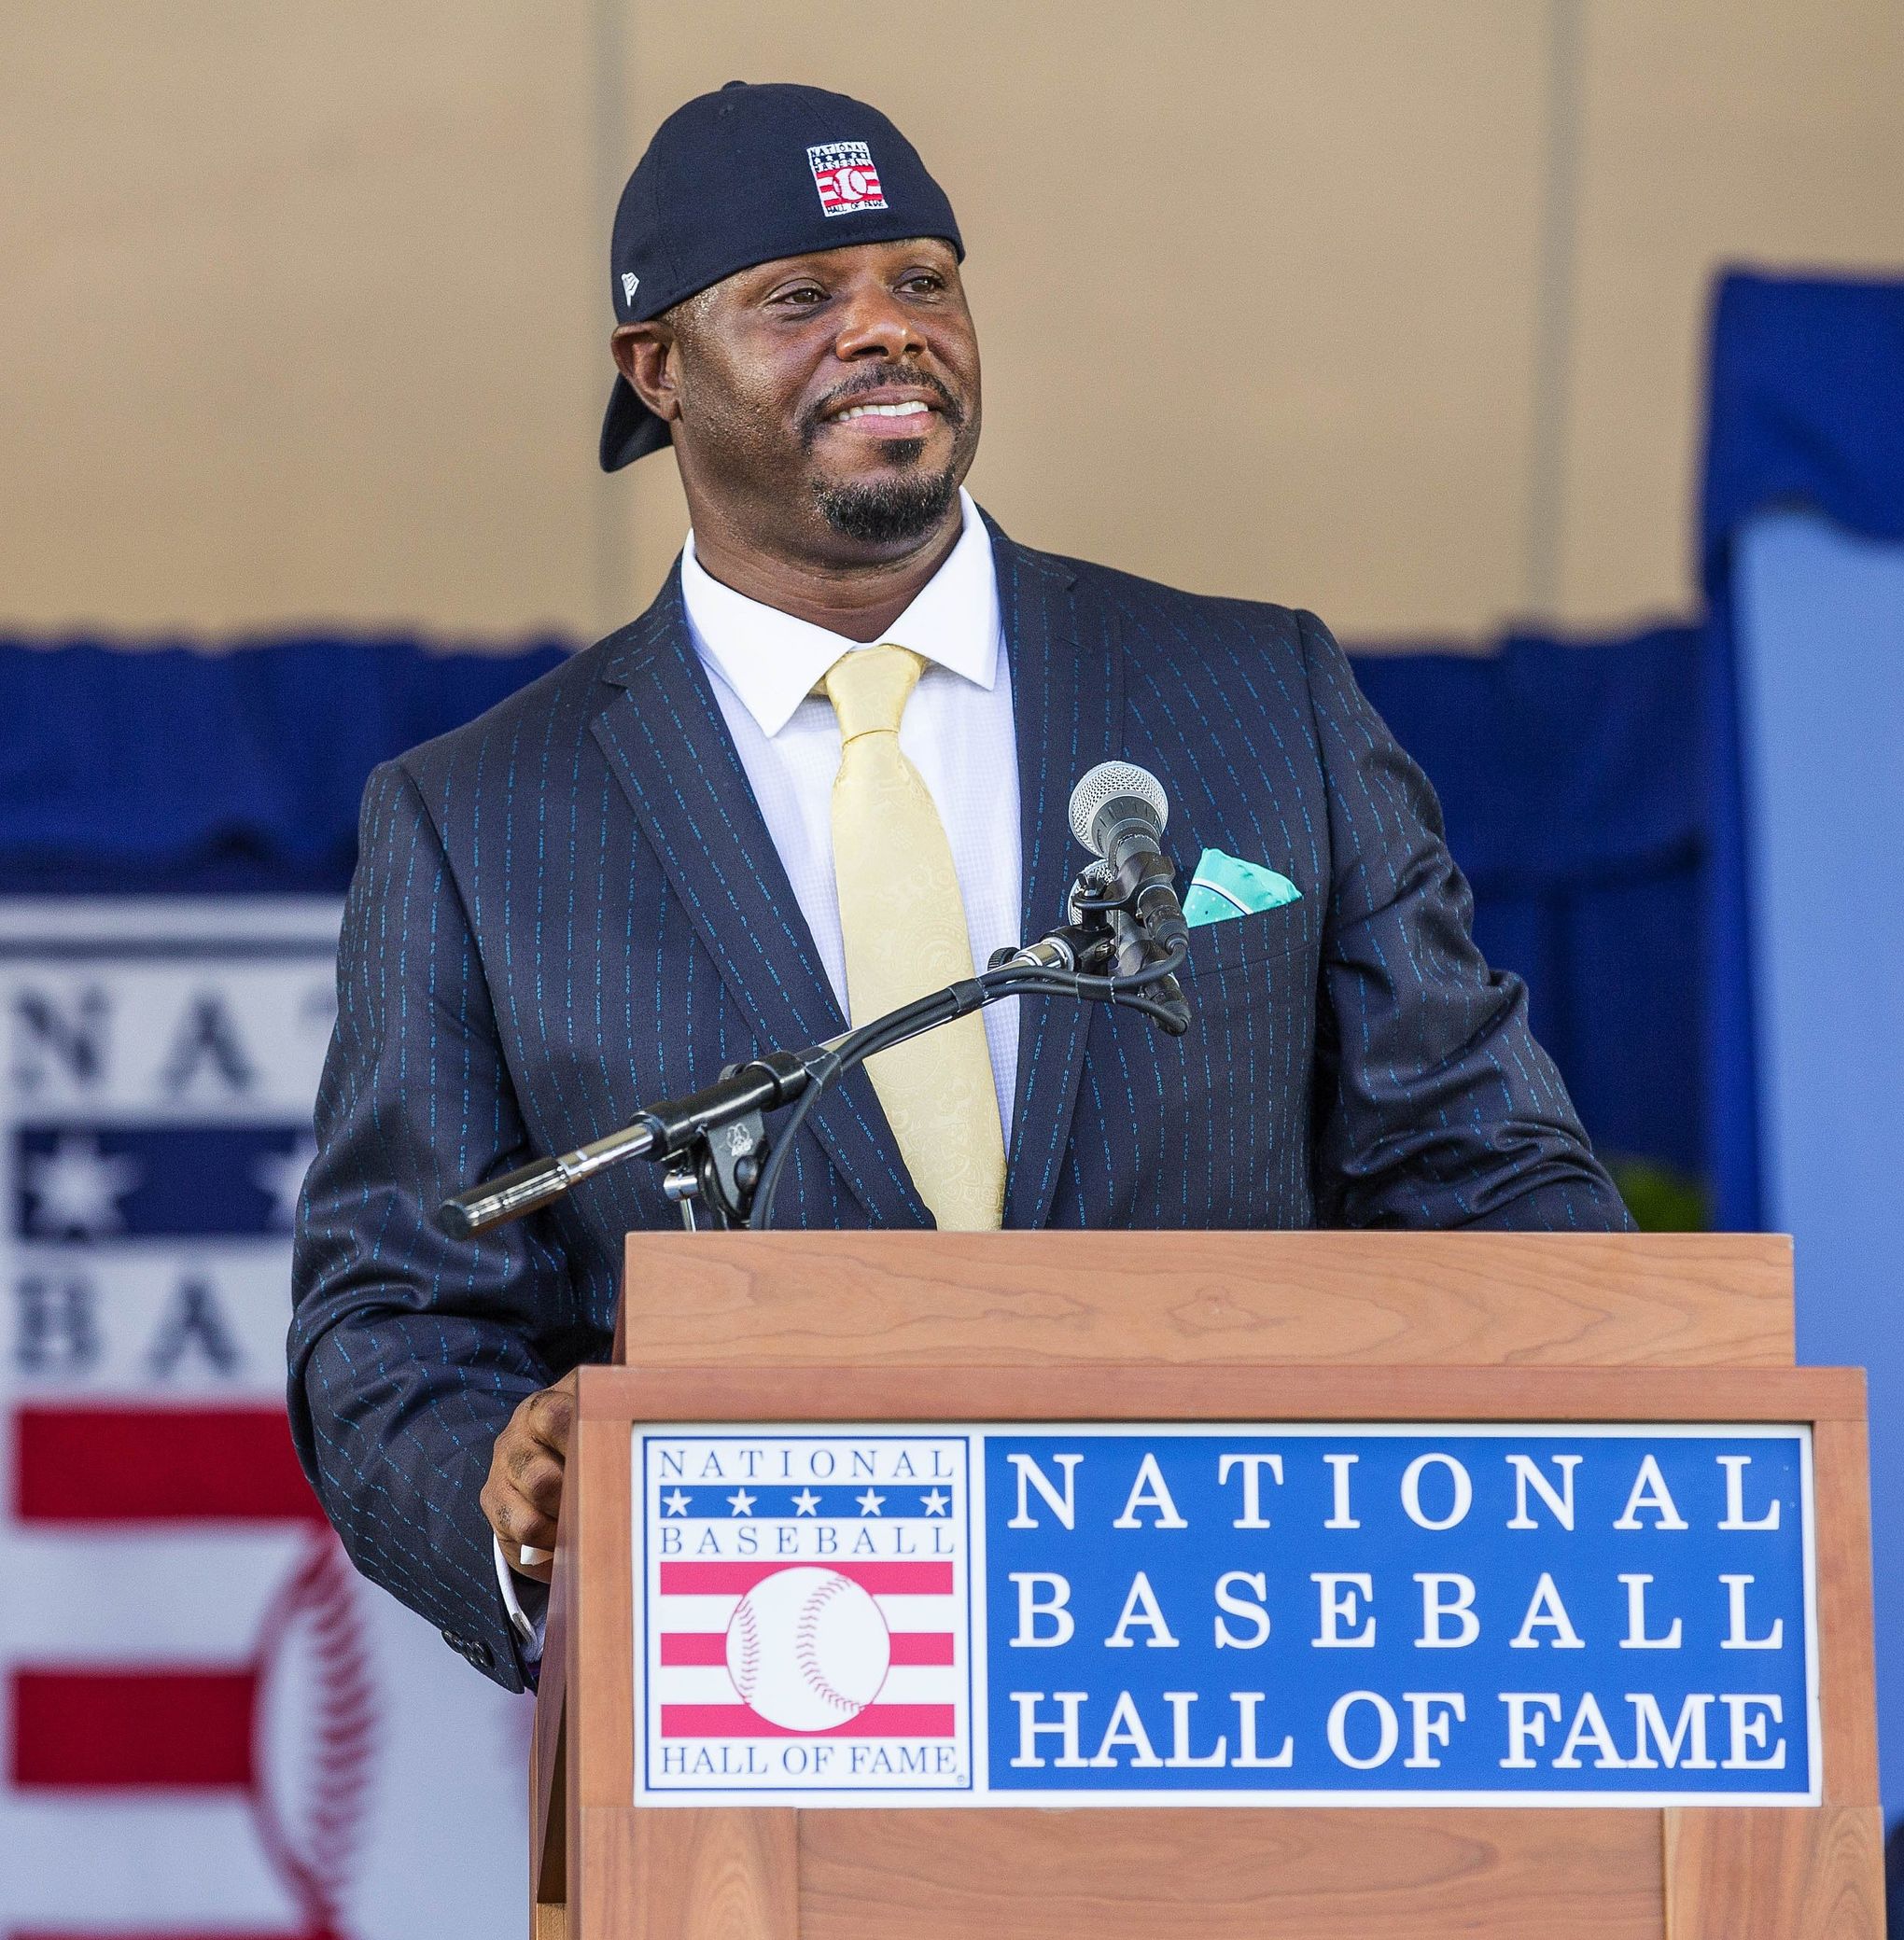 Hall of Fame's odd couple: Ken Griffey Jr., Mike Piazza